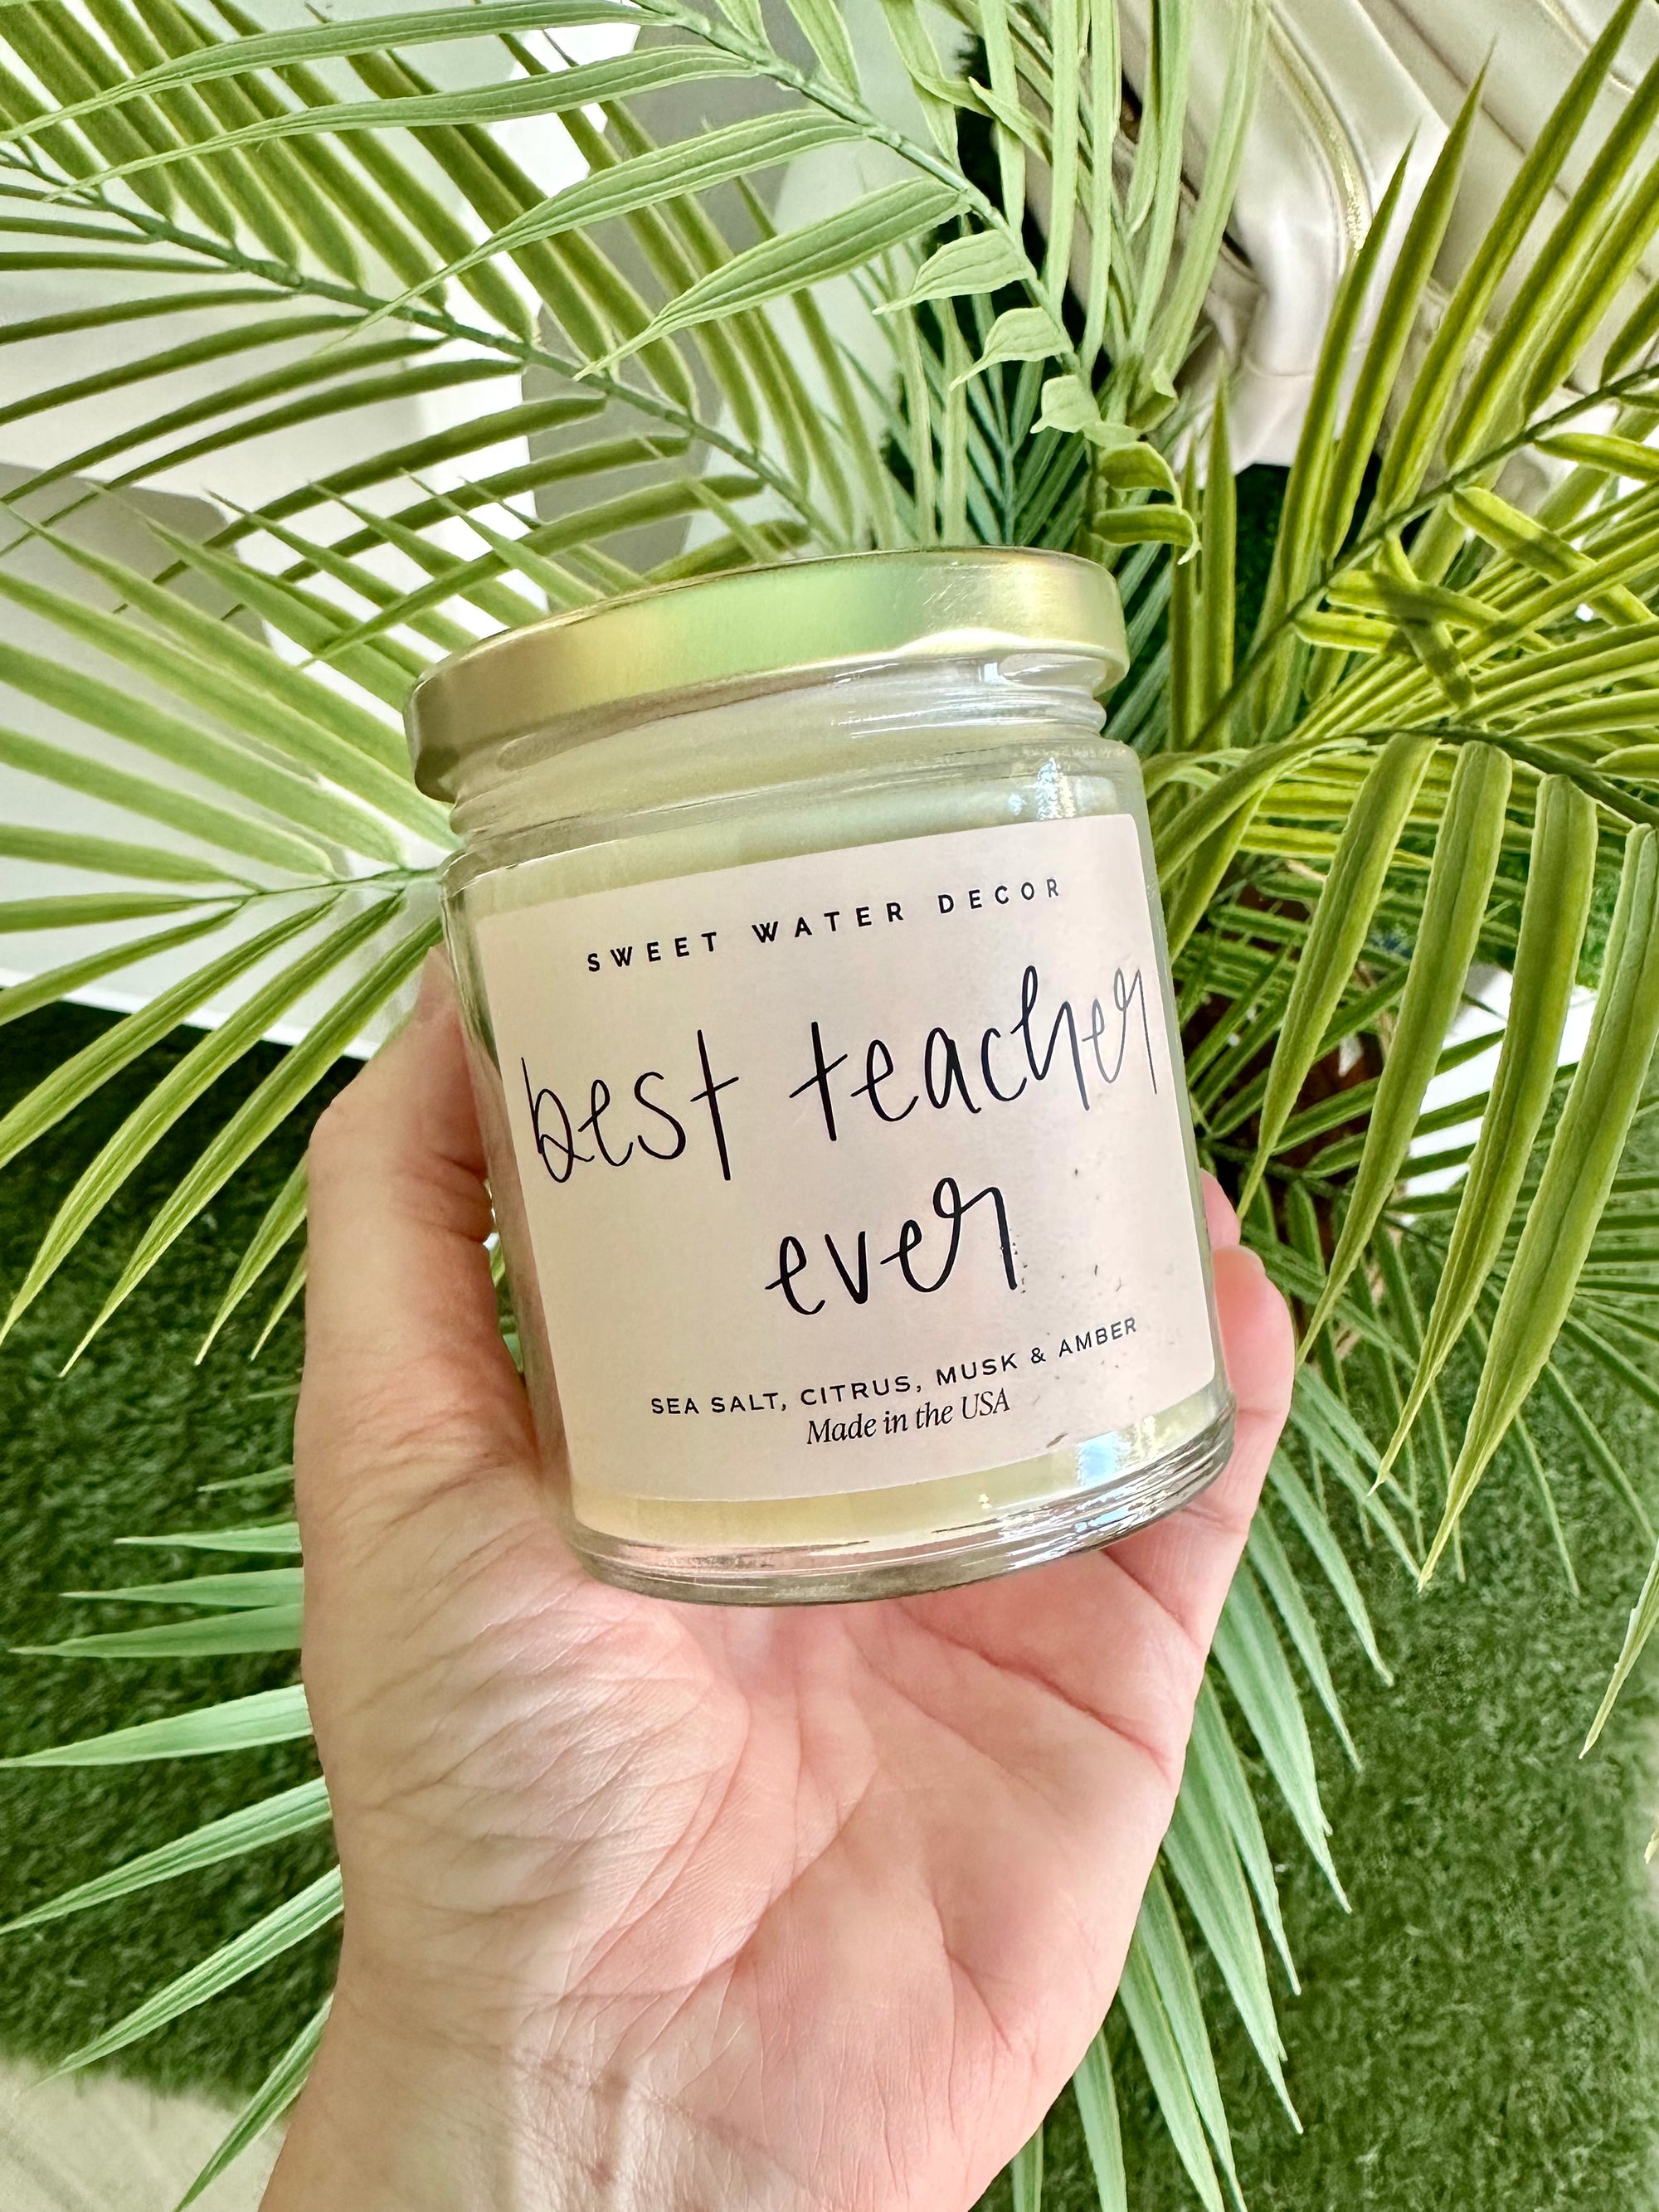 Soy Candle - Best Teacher Ever